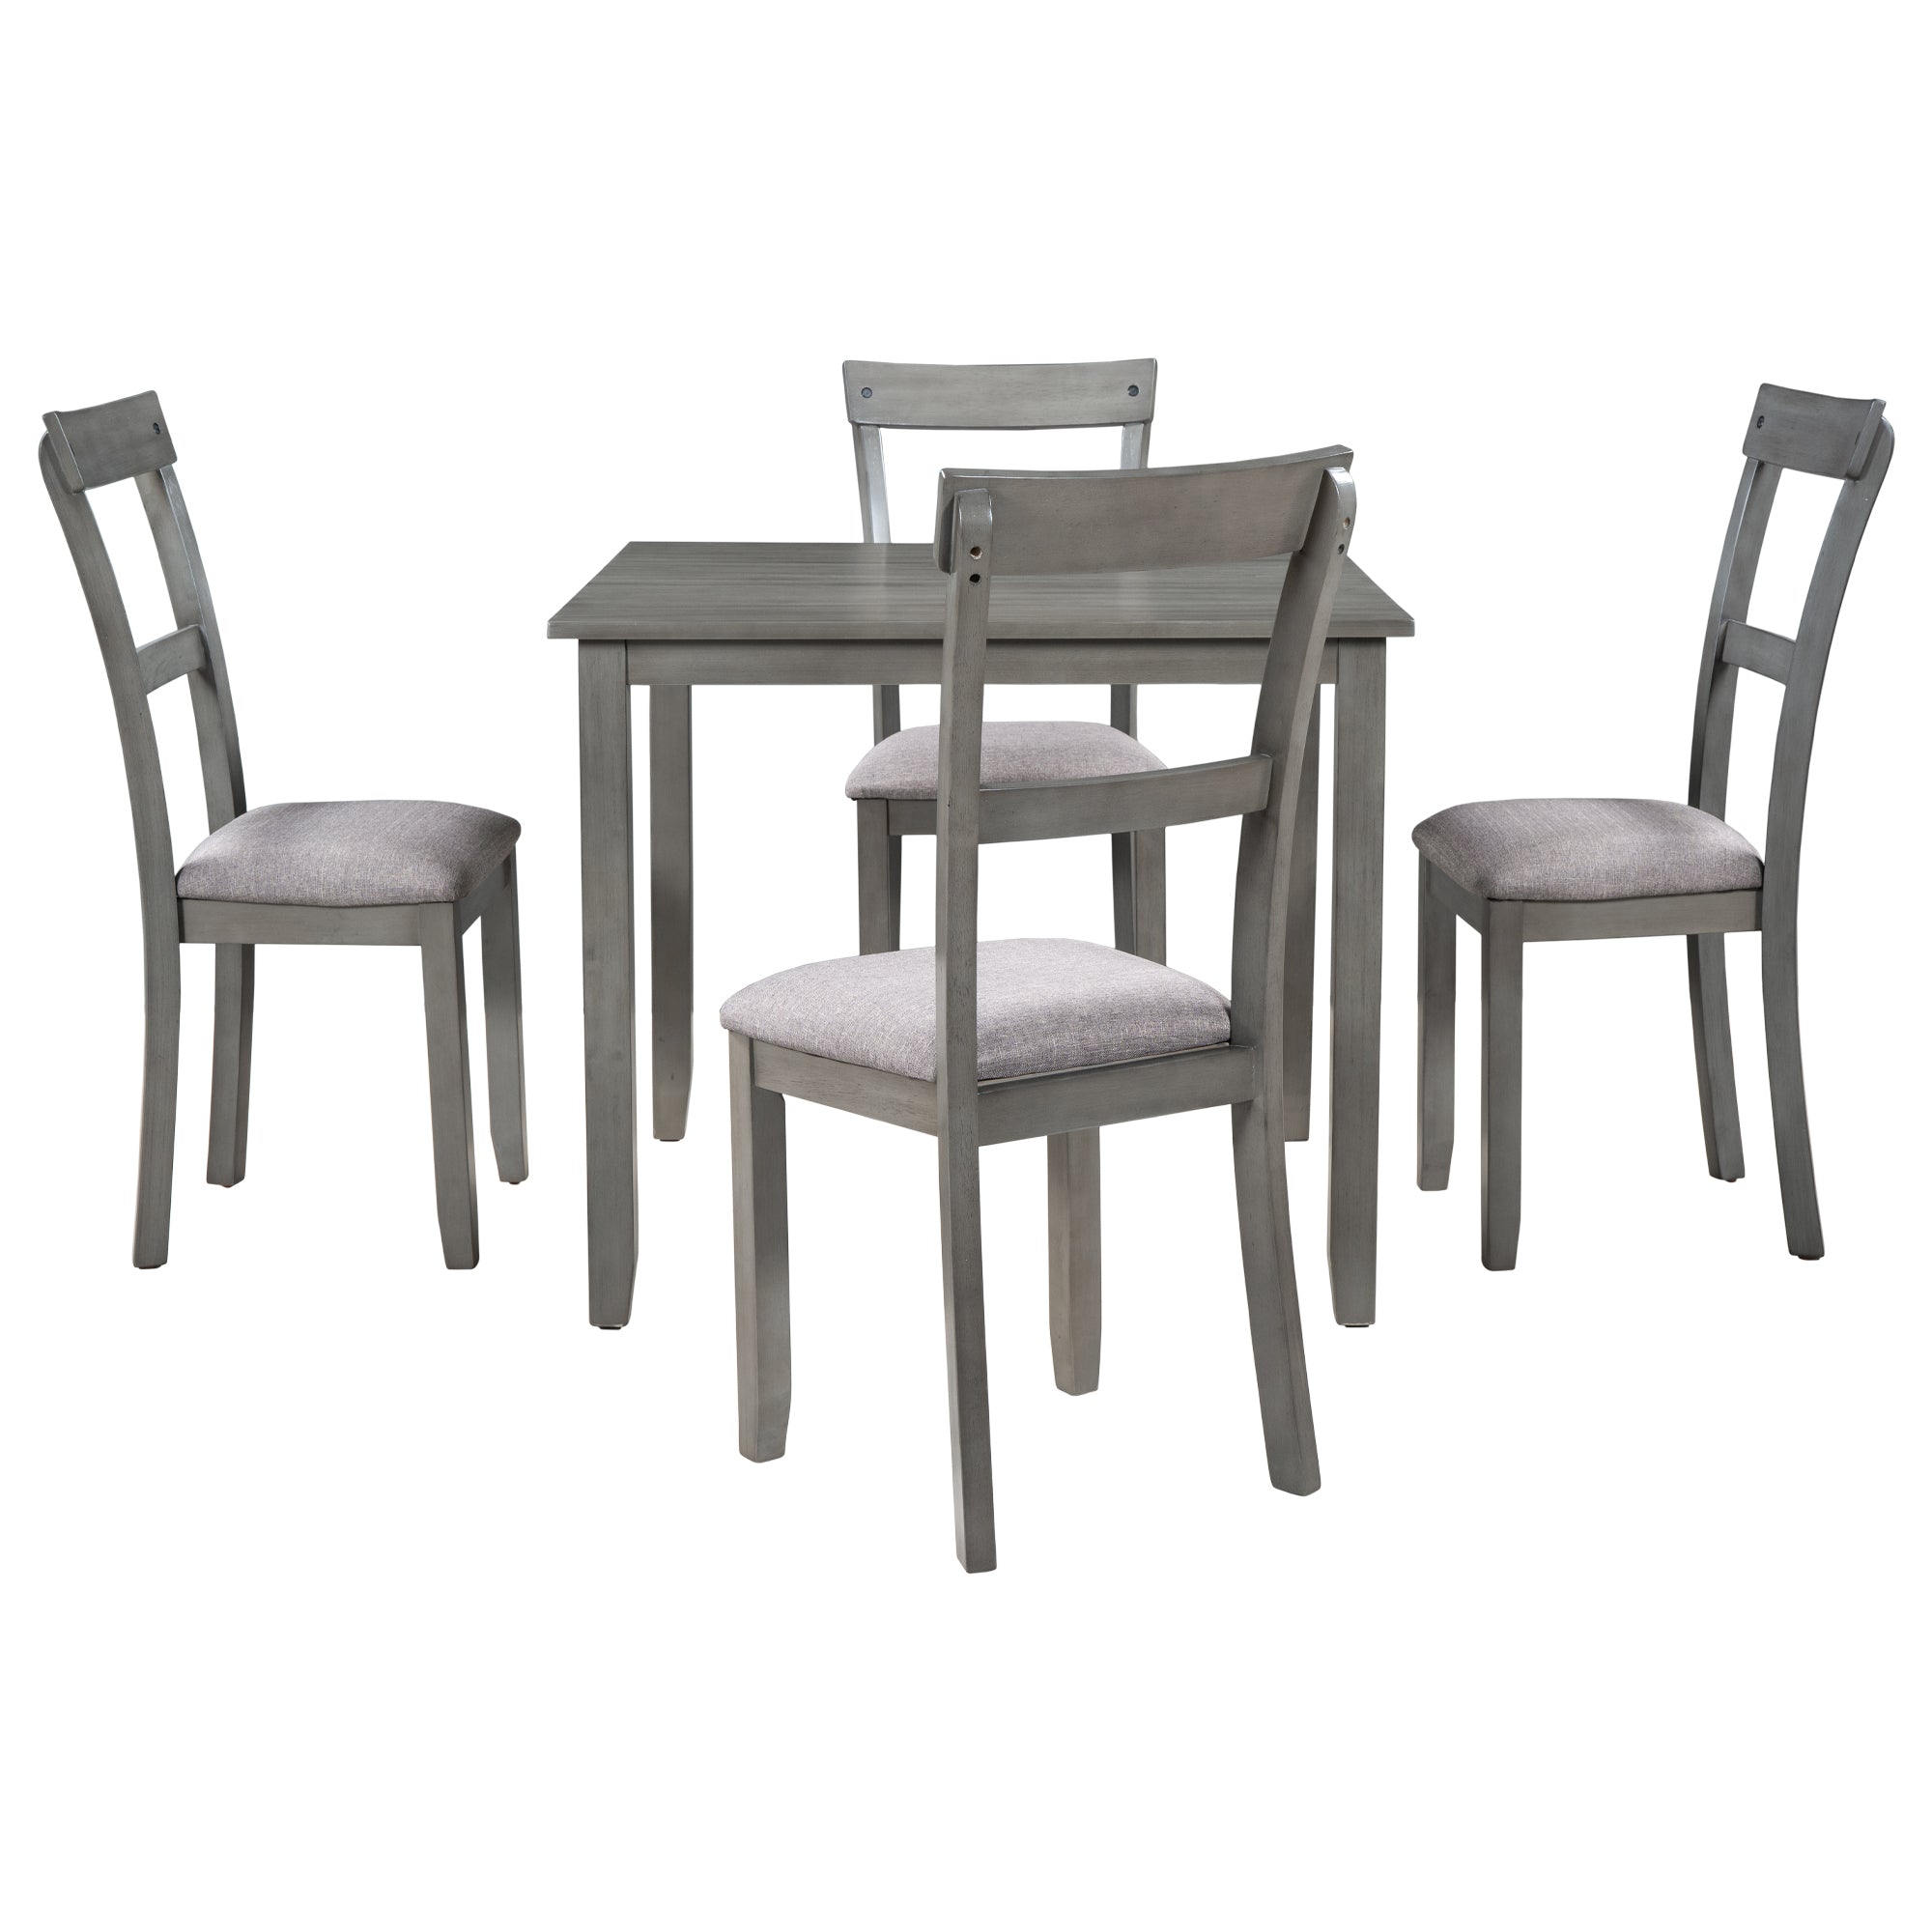 TREXM 5 Piece Dining Table Set Industrial Wooden Kitchen Table and 4 Chairs for Dining Room (Grey)